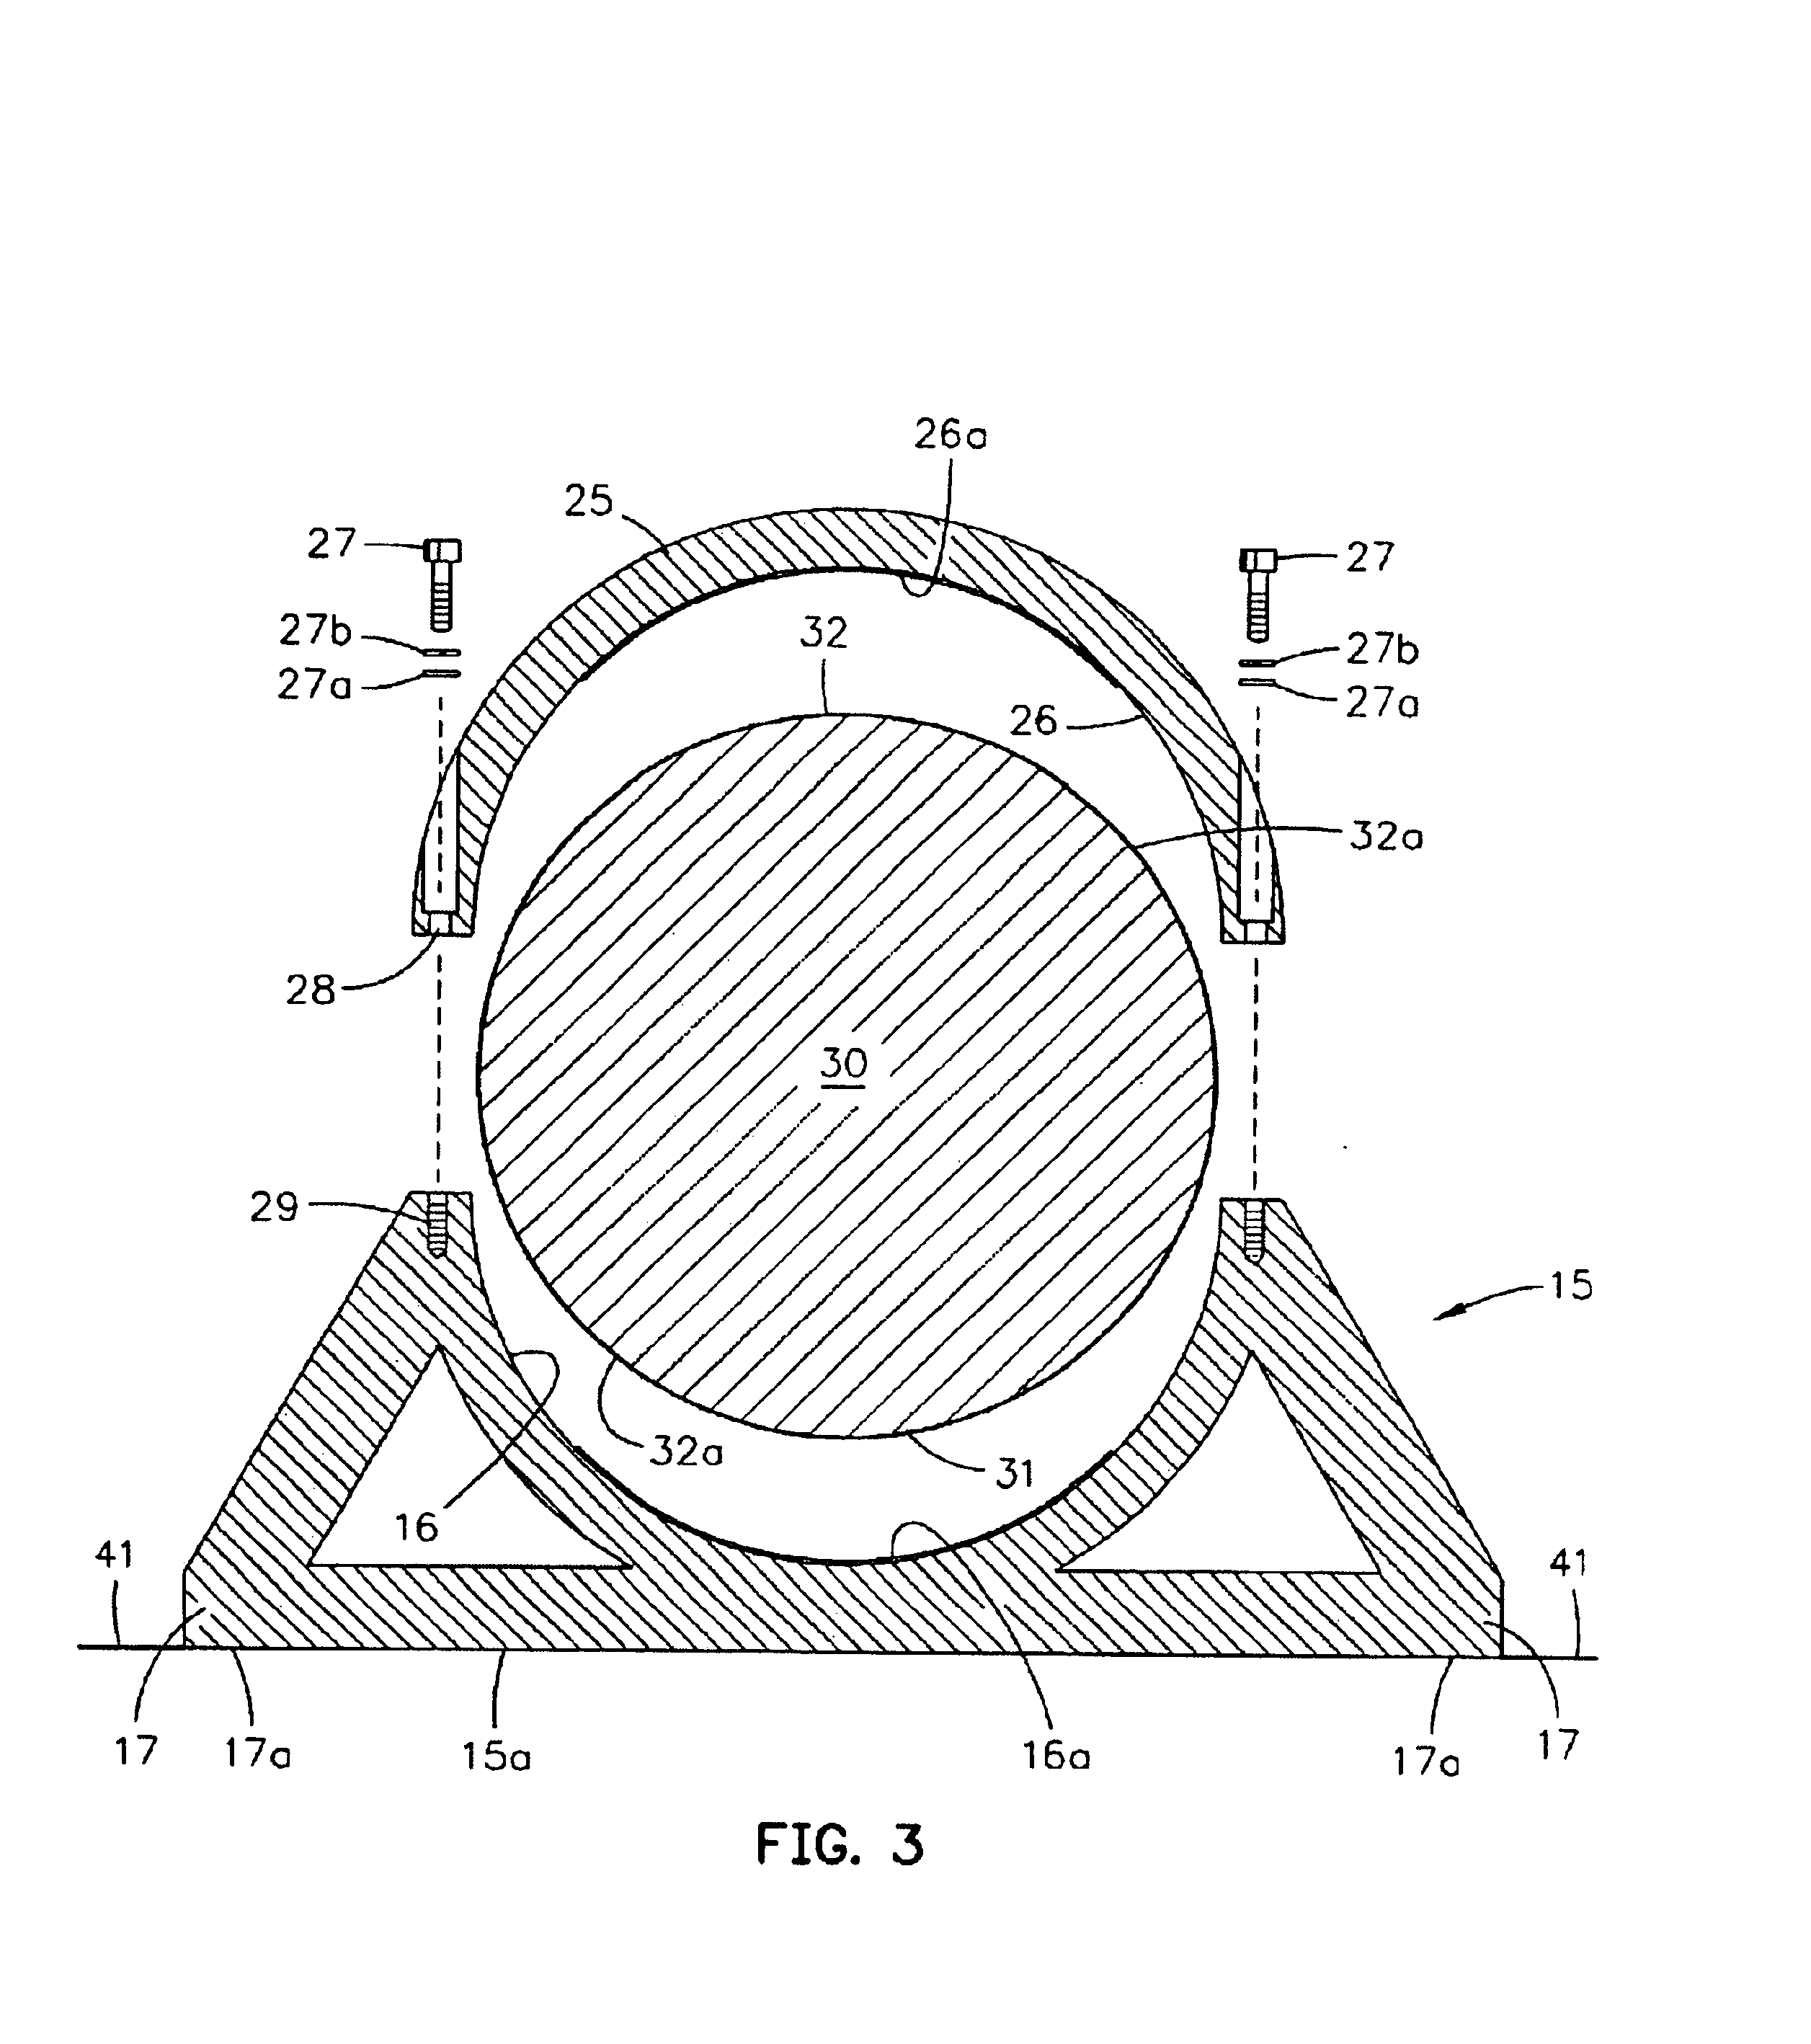 Combined stabilization bracket and mine system for gathering undersea data